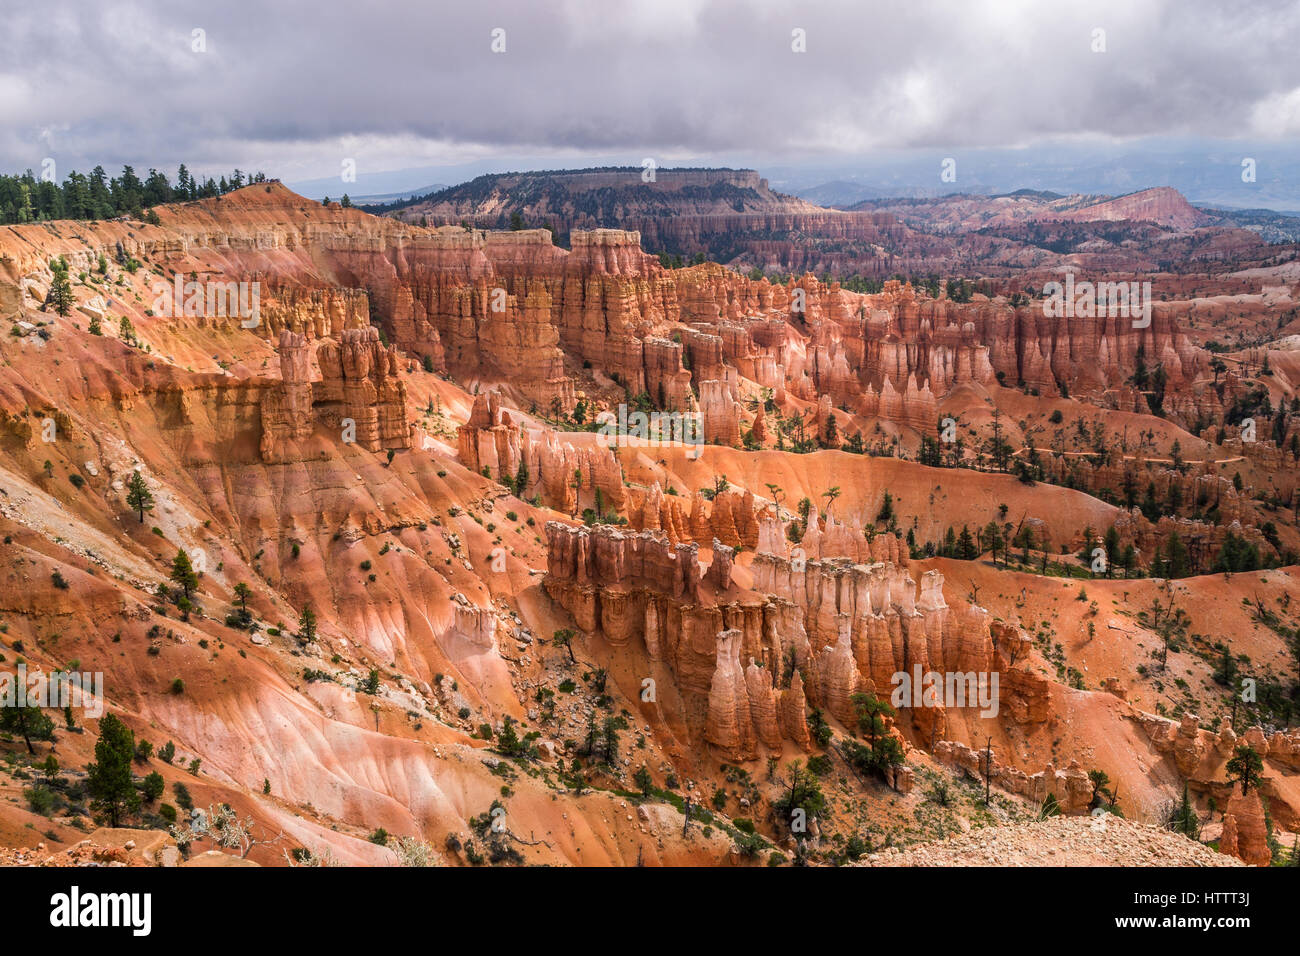 Morning lights on Bryce Canyon, Utah. View from Sunset Point. Stock Photo